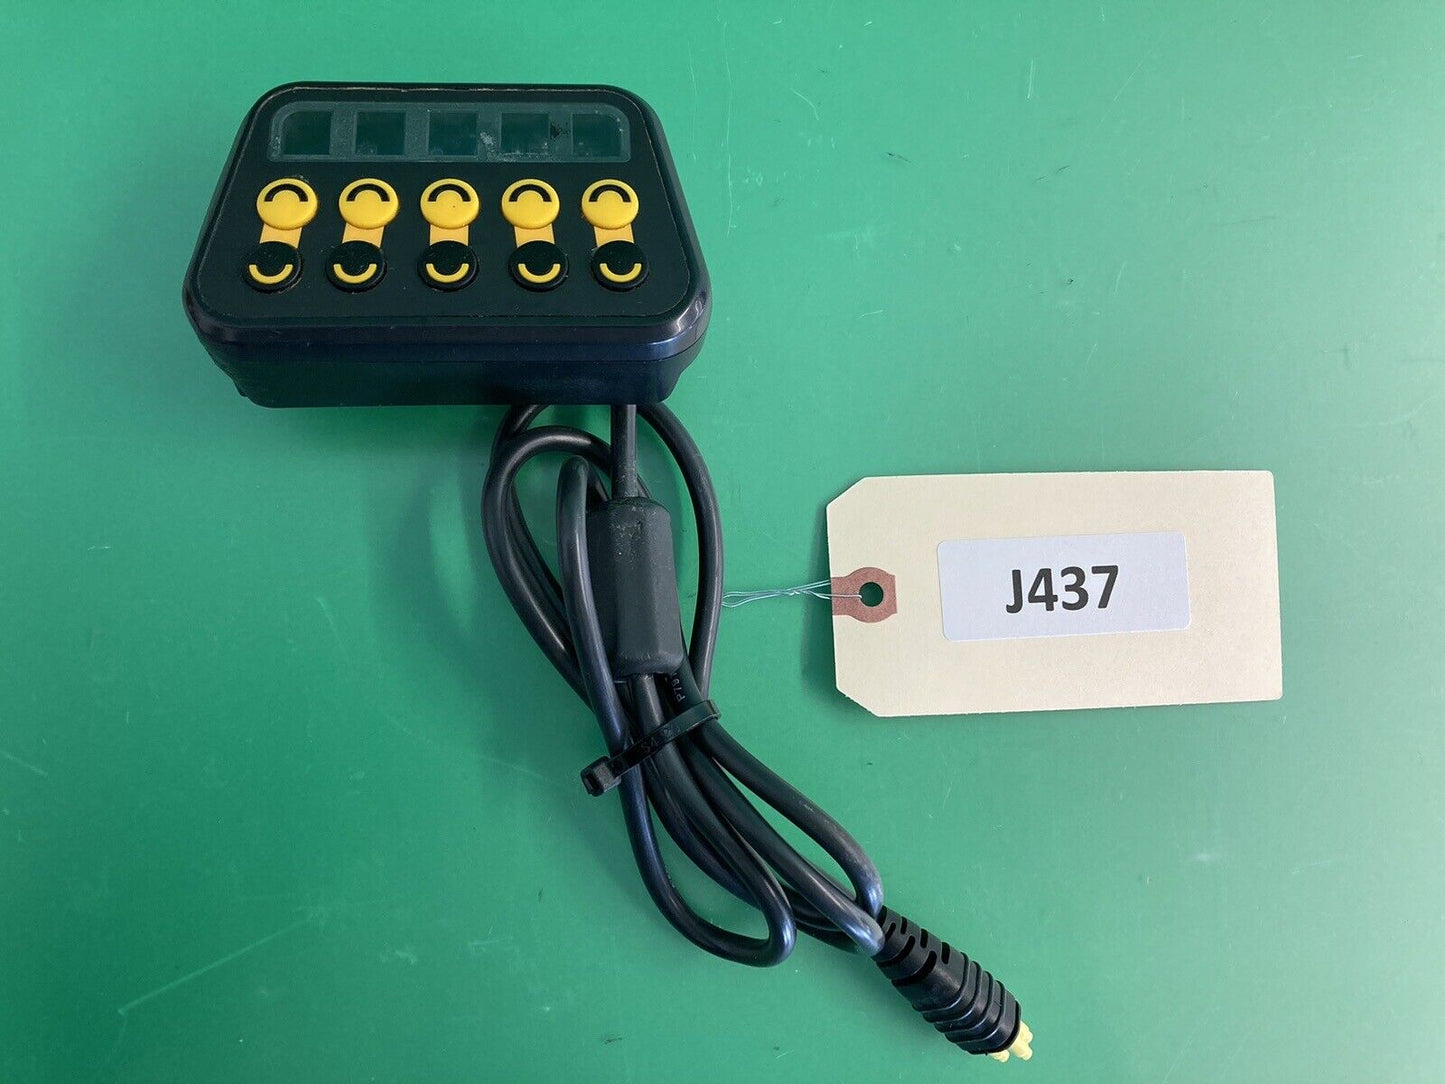 Quickie Control Plus 5 Toggle Function Switchbox w/ USB CHARGER* 130913 #J437